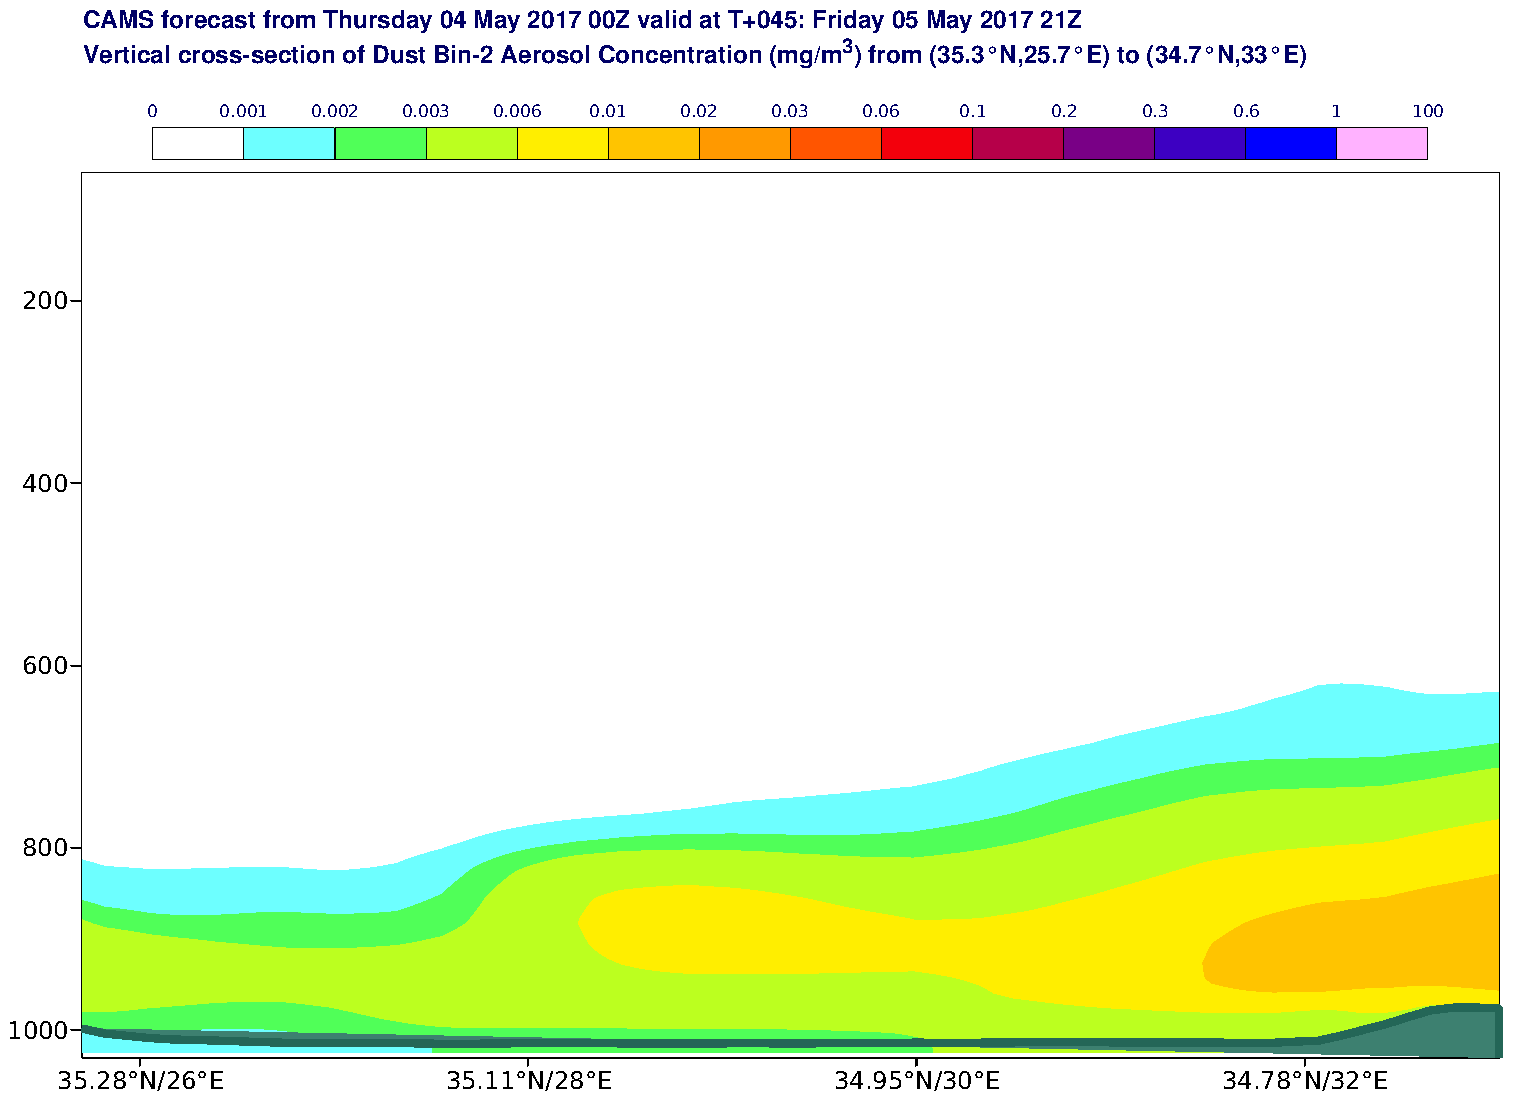 Vertical cross-section of Dust Bin-2 Aerosol Concentration (mg/m3) valid at T45 - 2017-05-05 21:00